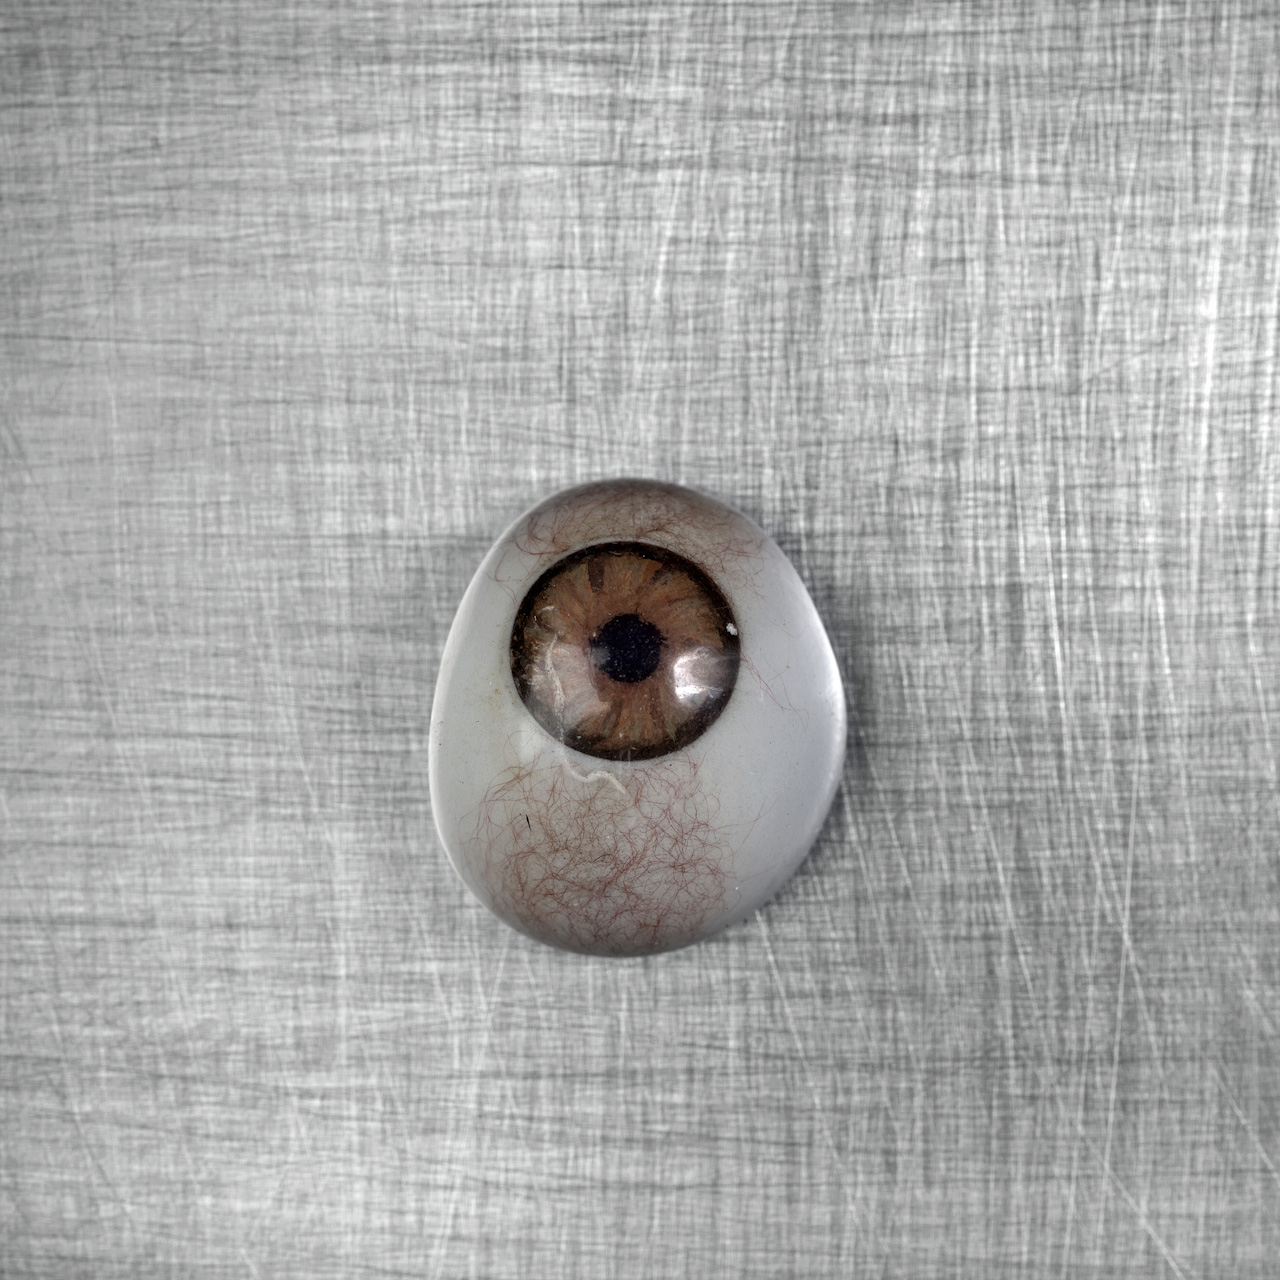 Glass eye, from Quest for Identity. Photo: Ziyah Gafić